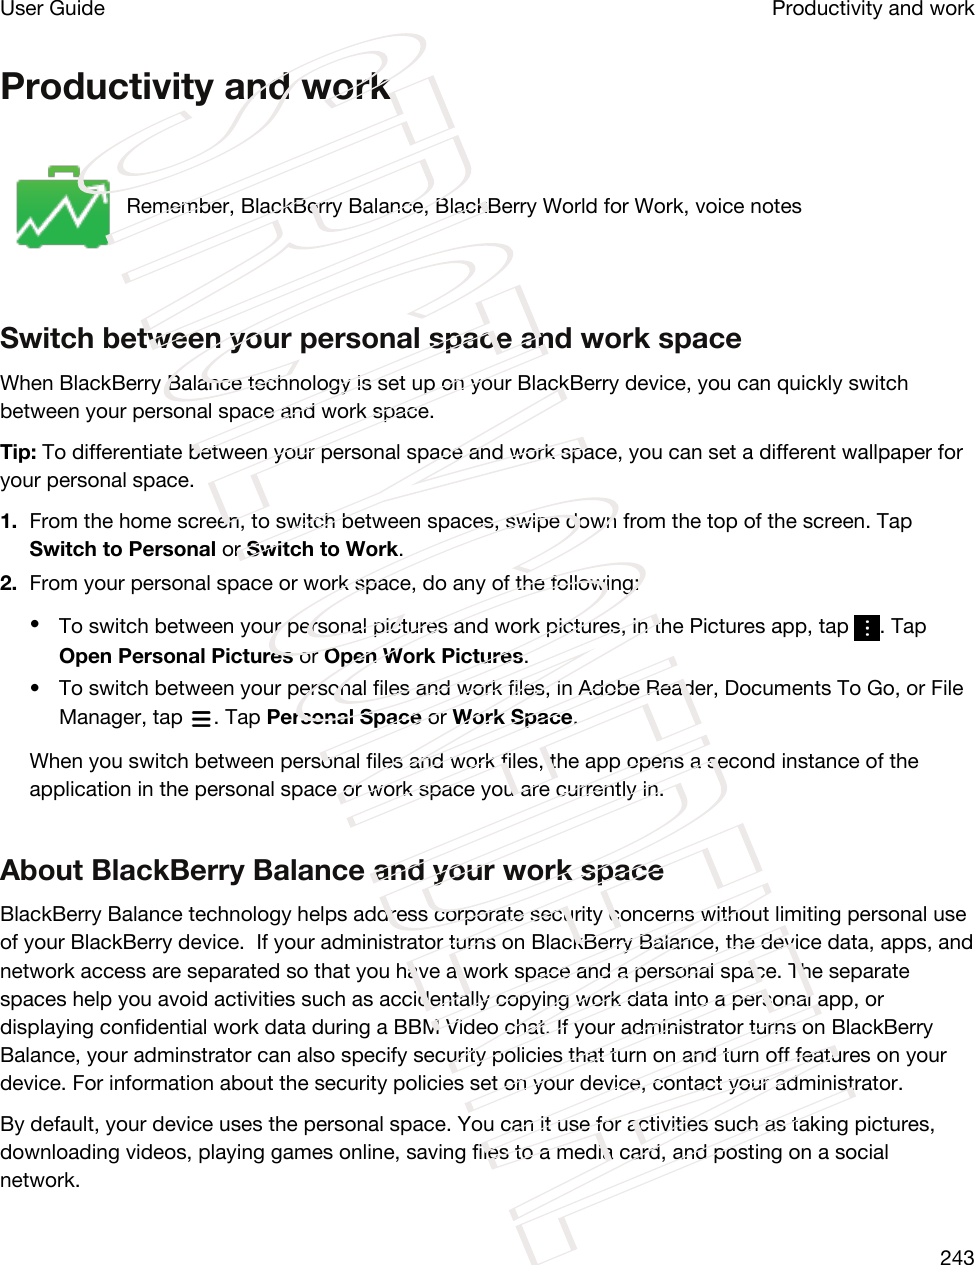 Productivity and workRemember, BlackBerry Balance, BlackBerry World for Work, voice notesSwitch between your personal space and work spaceWhen BlackBerry Balance technology is set up on your BlackBerry device, you can quickly switch between your personal space and work space.Tip: To differentiate between your personal space and work space, you can set a different wallpaper for your personal space.1. From the home screen, to switch between spaces, swipe down from the top of the screen. Tap Switch to Personal or Switch to Work.2. From your personal space or work space, do any of the following:•To switch between your personal pictures and work pictures, in the Pictures app, tap  . Tap Open Personal Pictures or Open Work Pictures.• To switch between your personal files and work files, in Adobe Reader, Documents To Go, or File Manager, tap  . Tap Personal Space or Work Space.When you switch between personal files and work files, the app opens a second instance of the application in the personal space or work space you are currently in.About BlackBerry Balance and your work spaceBlackBerry Balance technology helps address corporate security concerns without limiting personal use of your BlackBerry device.  If your administrator turns on BlackBerry Balance, the device data, apps, and network access are separated so that you have a work space and a personal space. The separate spaces help you avoid activities such as accidentally copying work data into a personal app, or displaying confidential work data during a BBM Video chat. If your administrator turns on BlackBerry Balance, your adminstrator can also specify security policies that turn on and turn off features on your device. For information about the security policies set on your device, contact your administrator.By default, your device uses the personal space. You can it use for activities such as taking pictures, downloading videos, playing games online, saving files to a media card, and posting on a social network. Productivity and workUser Guide243STRICTLY CONFIDENTIAL